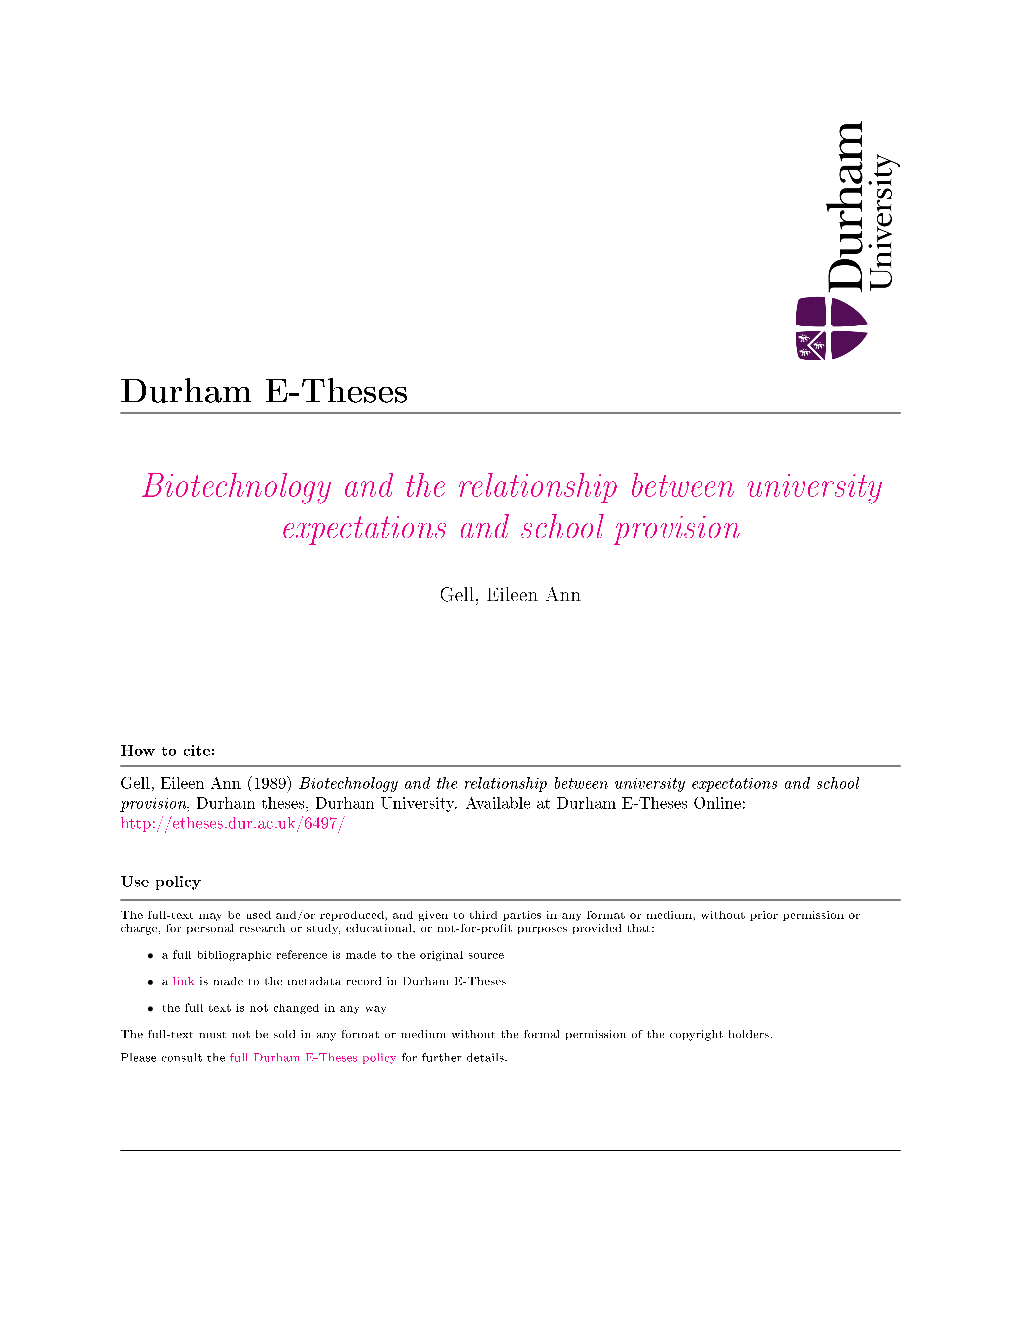 Biotechnology and the Relationship Between University Expectations and School Provision